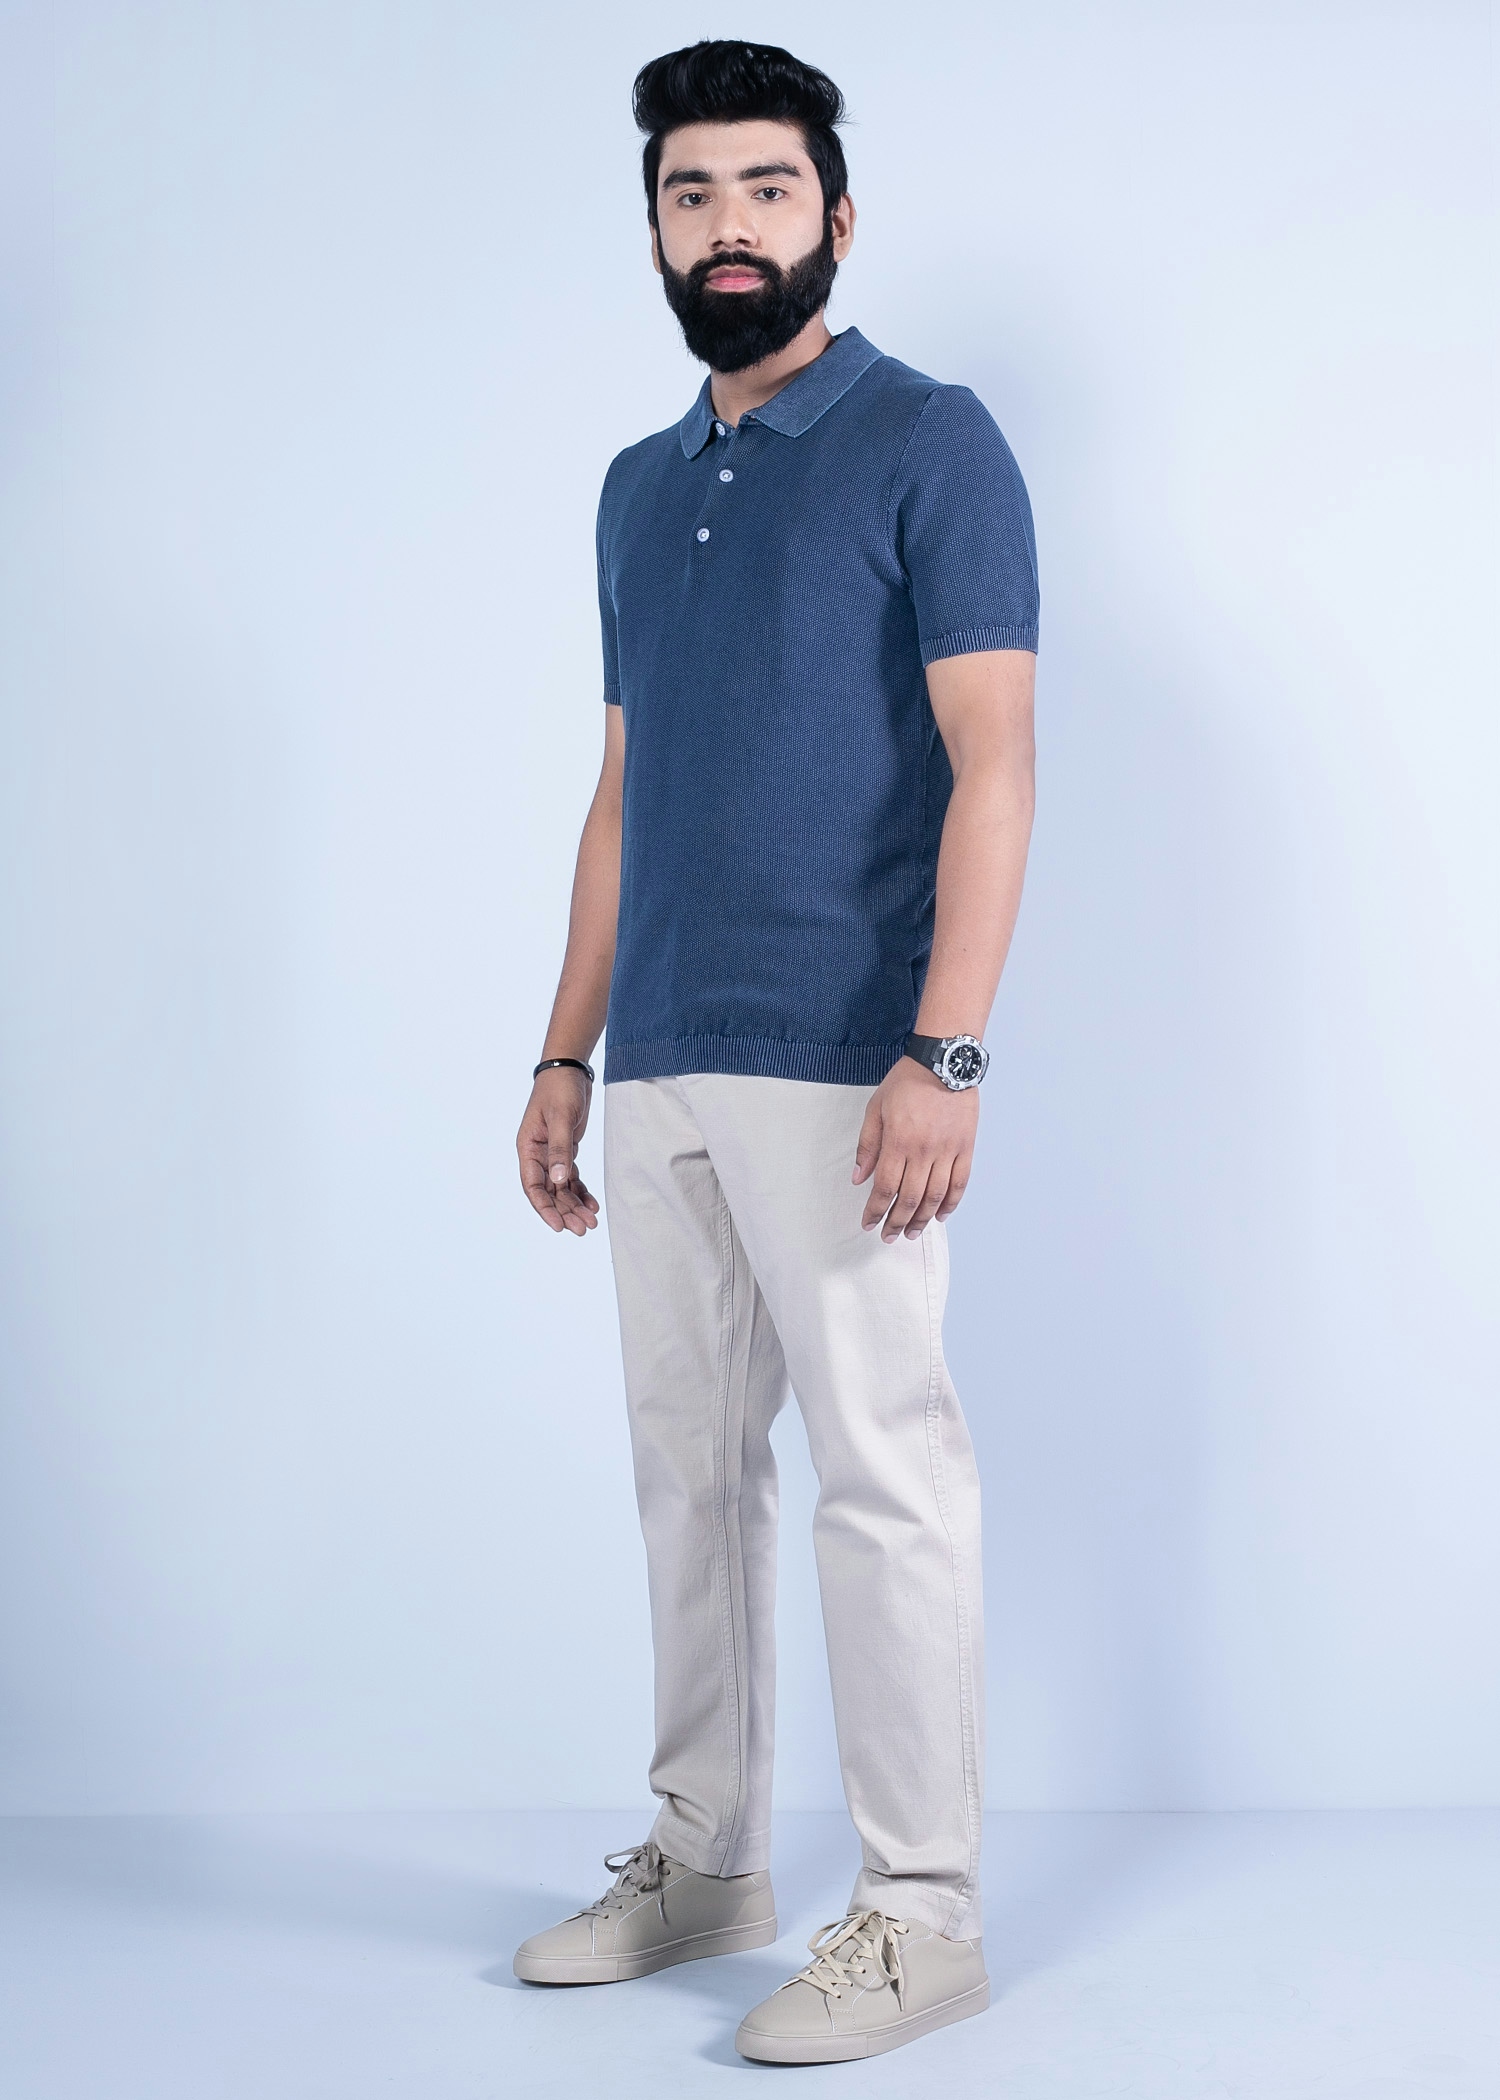 tanta polo navy color full side view